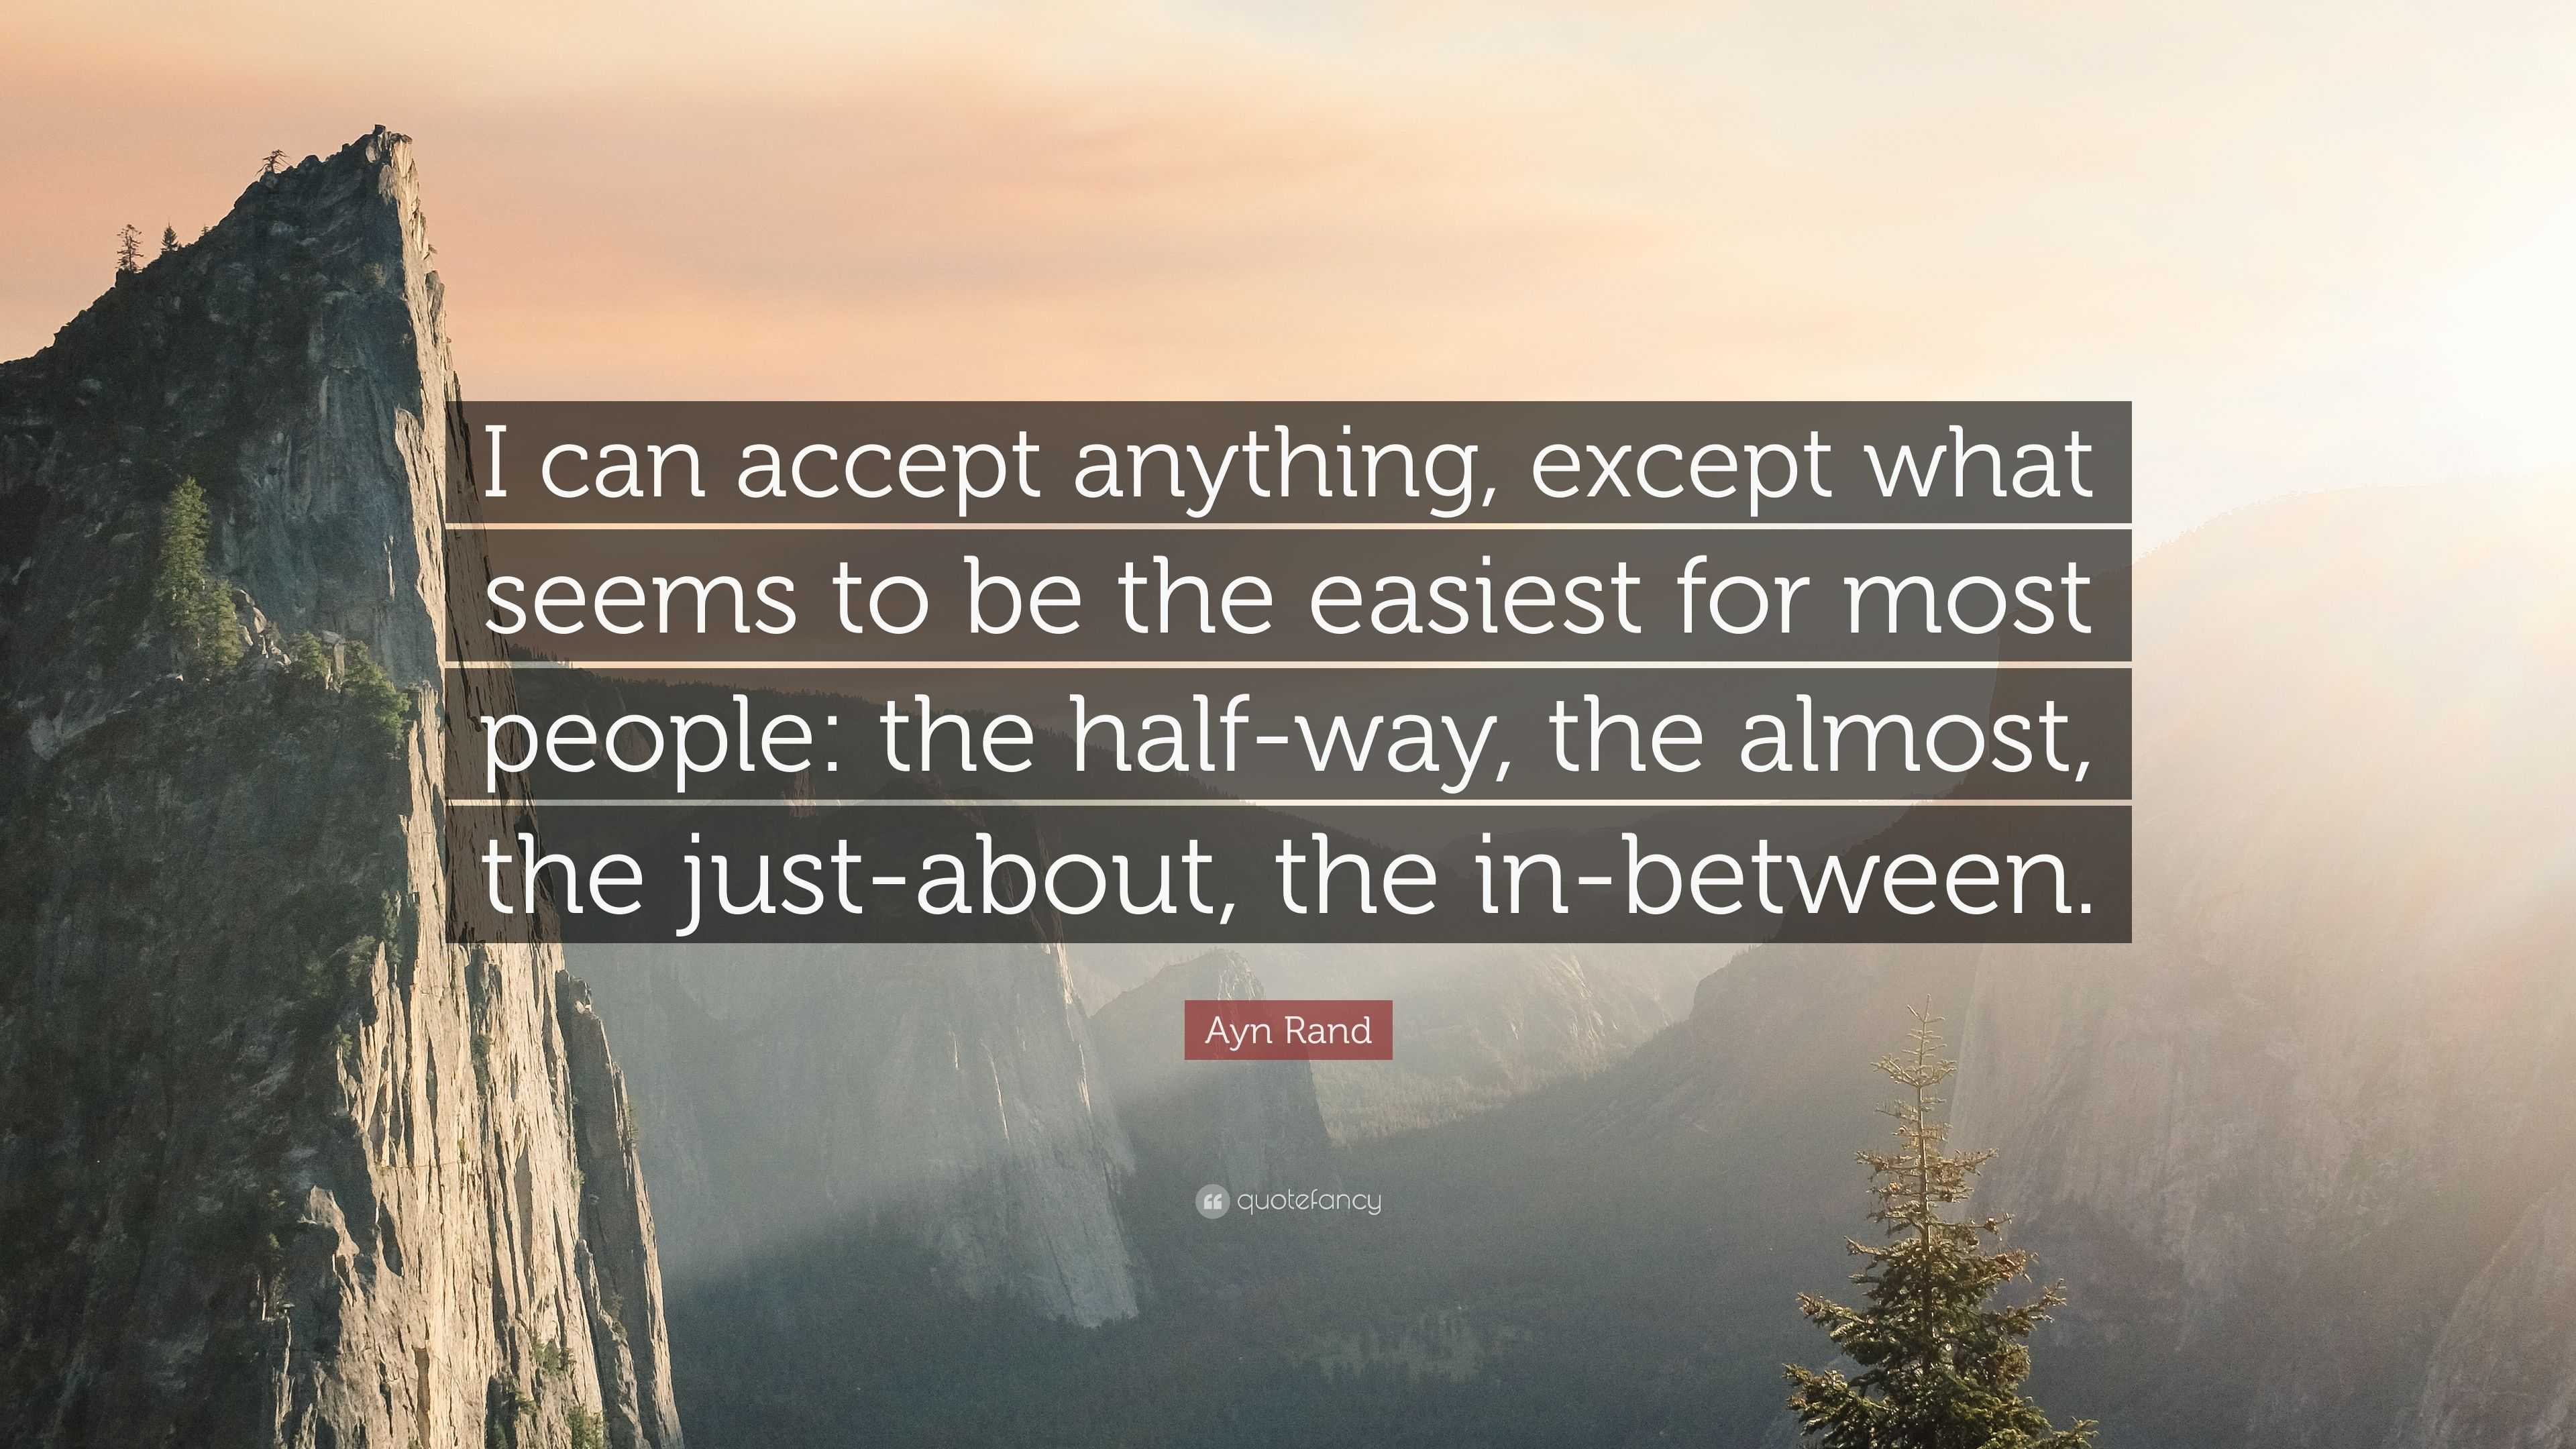 Ayn Rand Quote: “I can accept anything, except what seems to be the ...